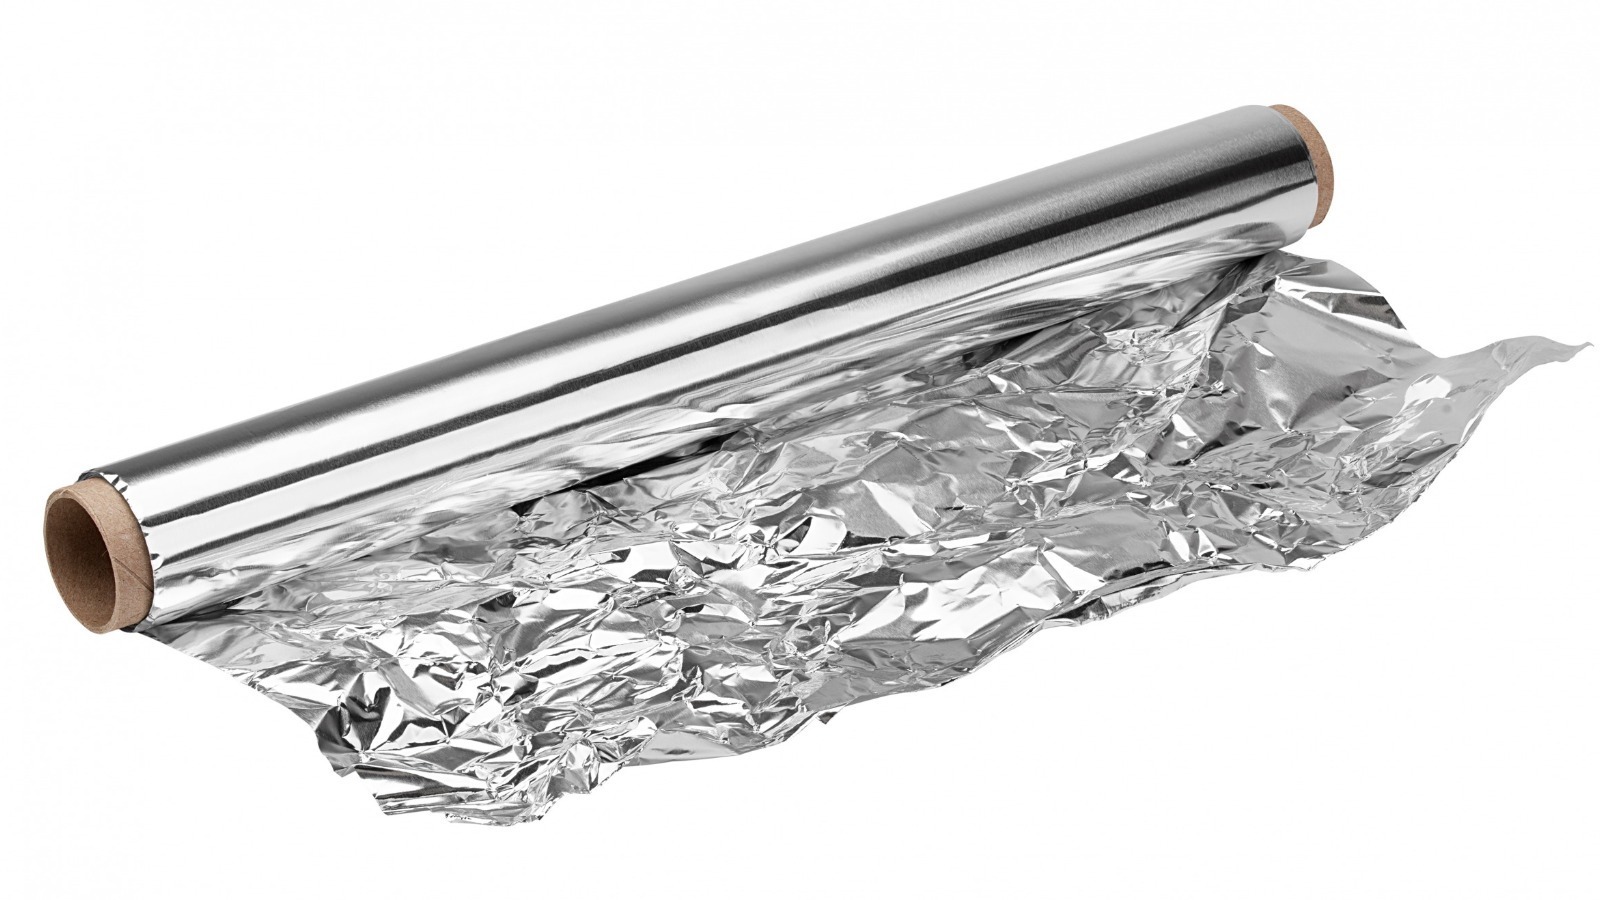 https://www.mashed.com/img/gallery/is-aluminum-foil-actually-recyclable-the-answer-is-complicated/l-intro-1652229454.jpg